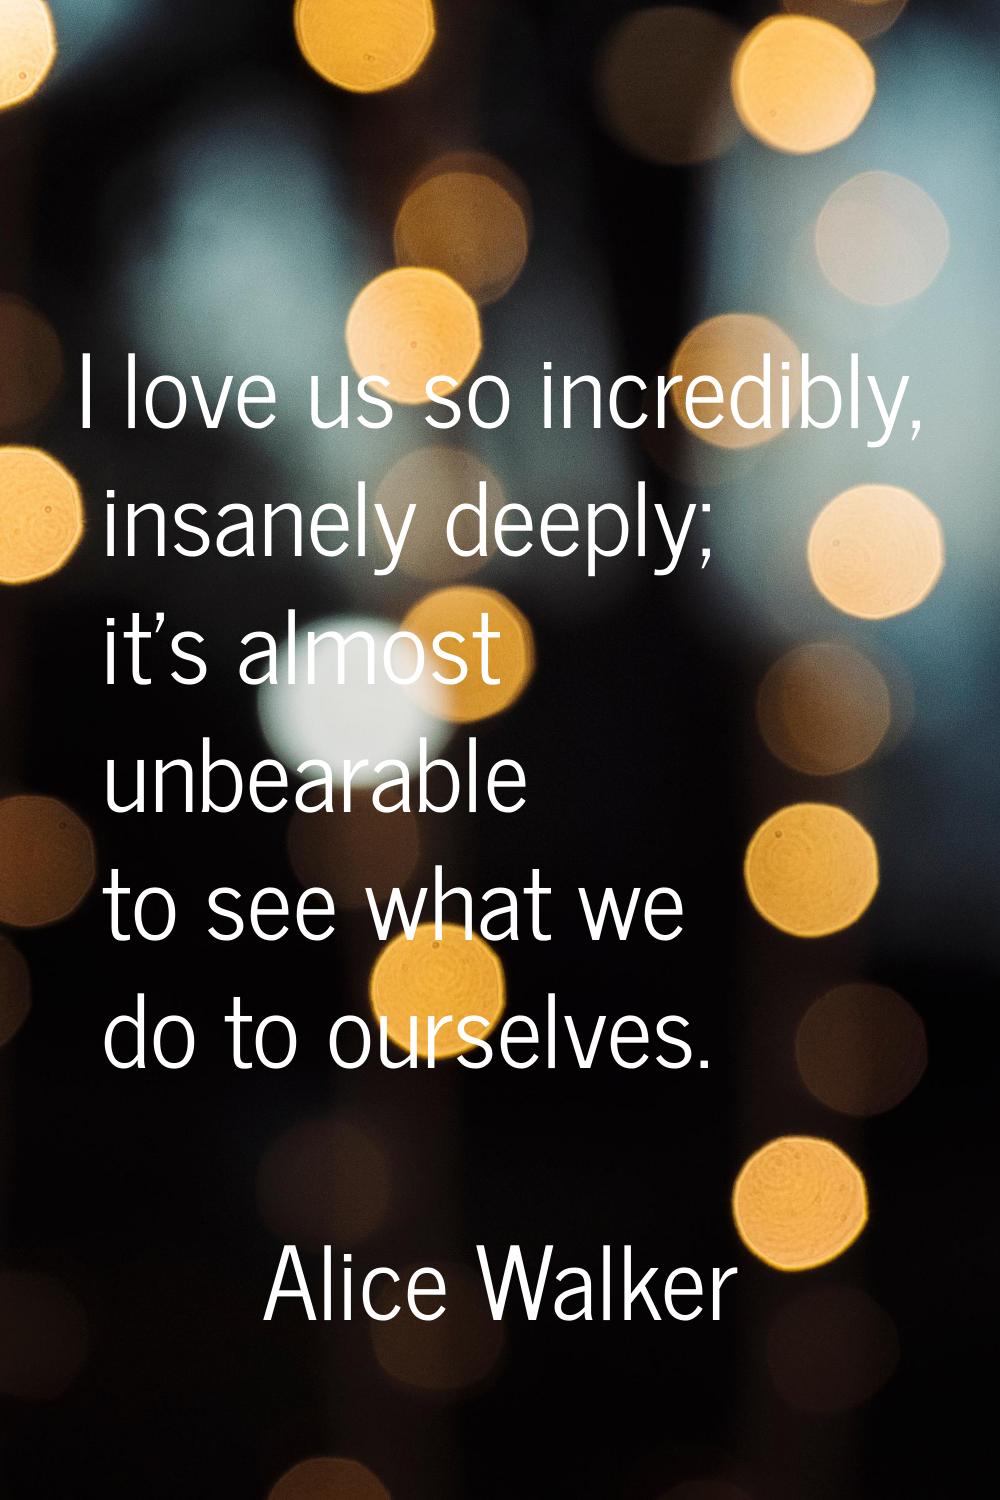 I love us so incredibly, insanely deeply; it's almost unbearable to see what we do to ourselves.